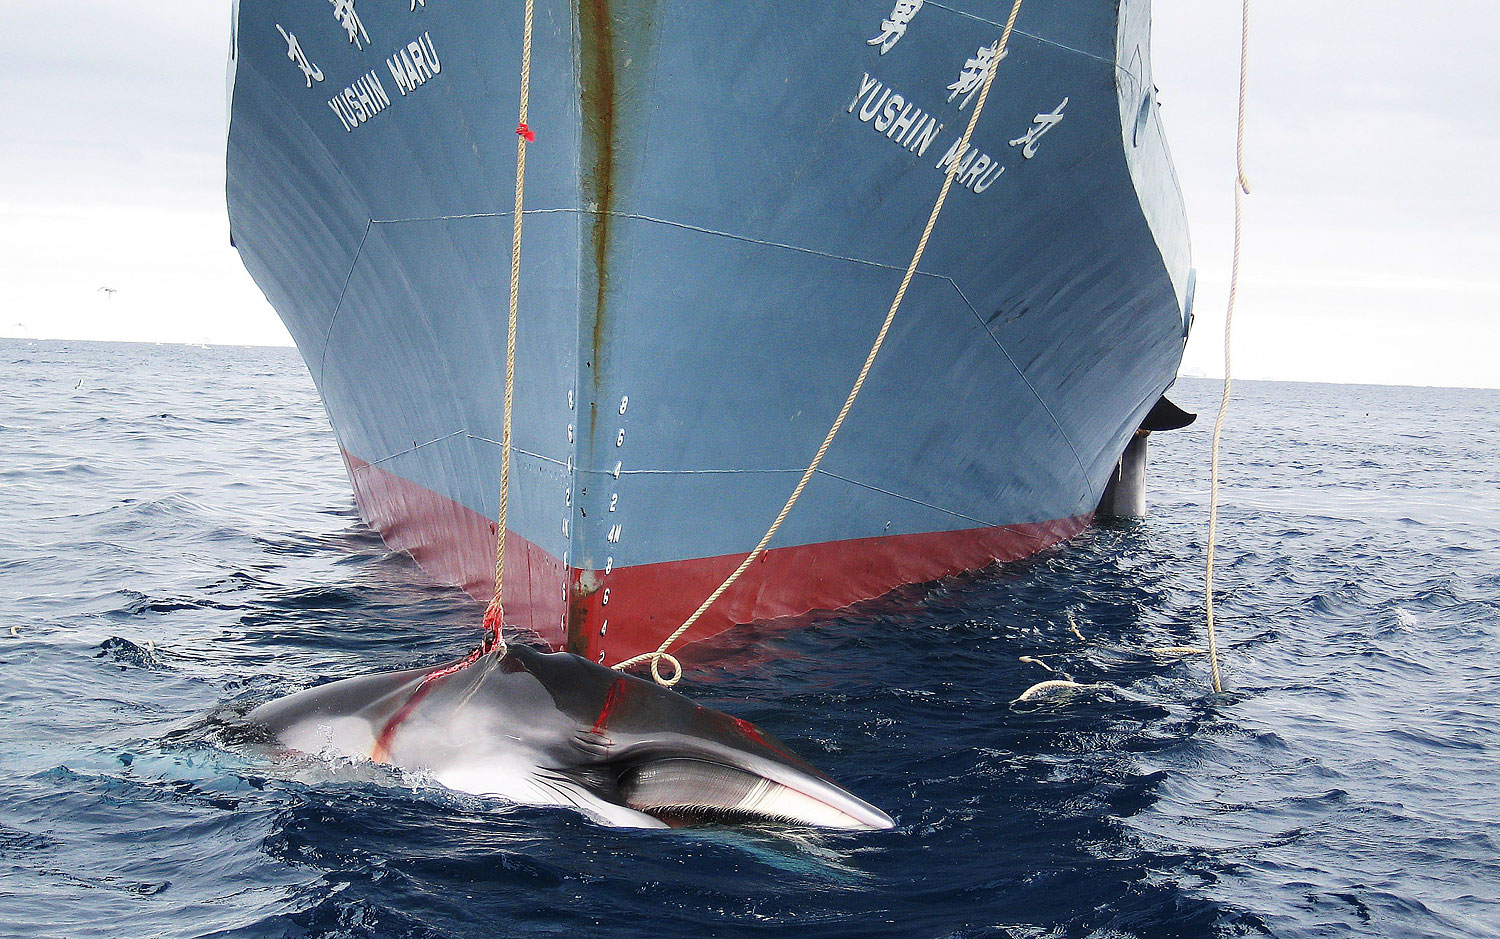 A photo released in 2008 shows a whale being dragged on board a Japanese ship after being harpooned in Antarctic waters (AFP/Getty Images)